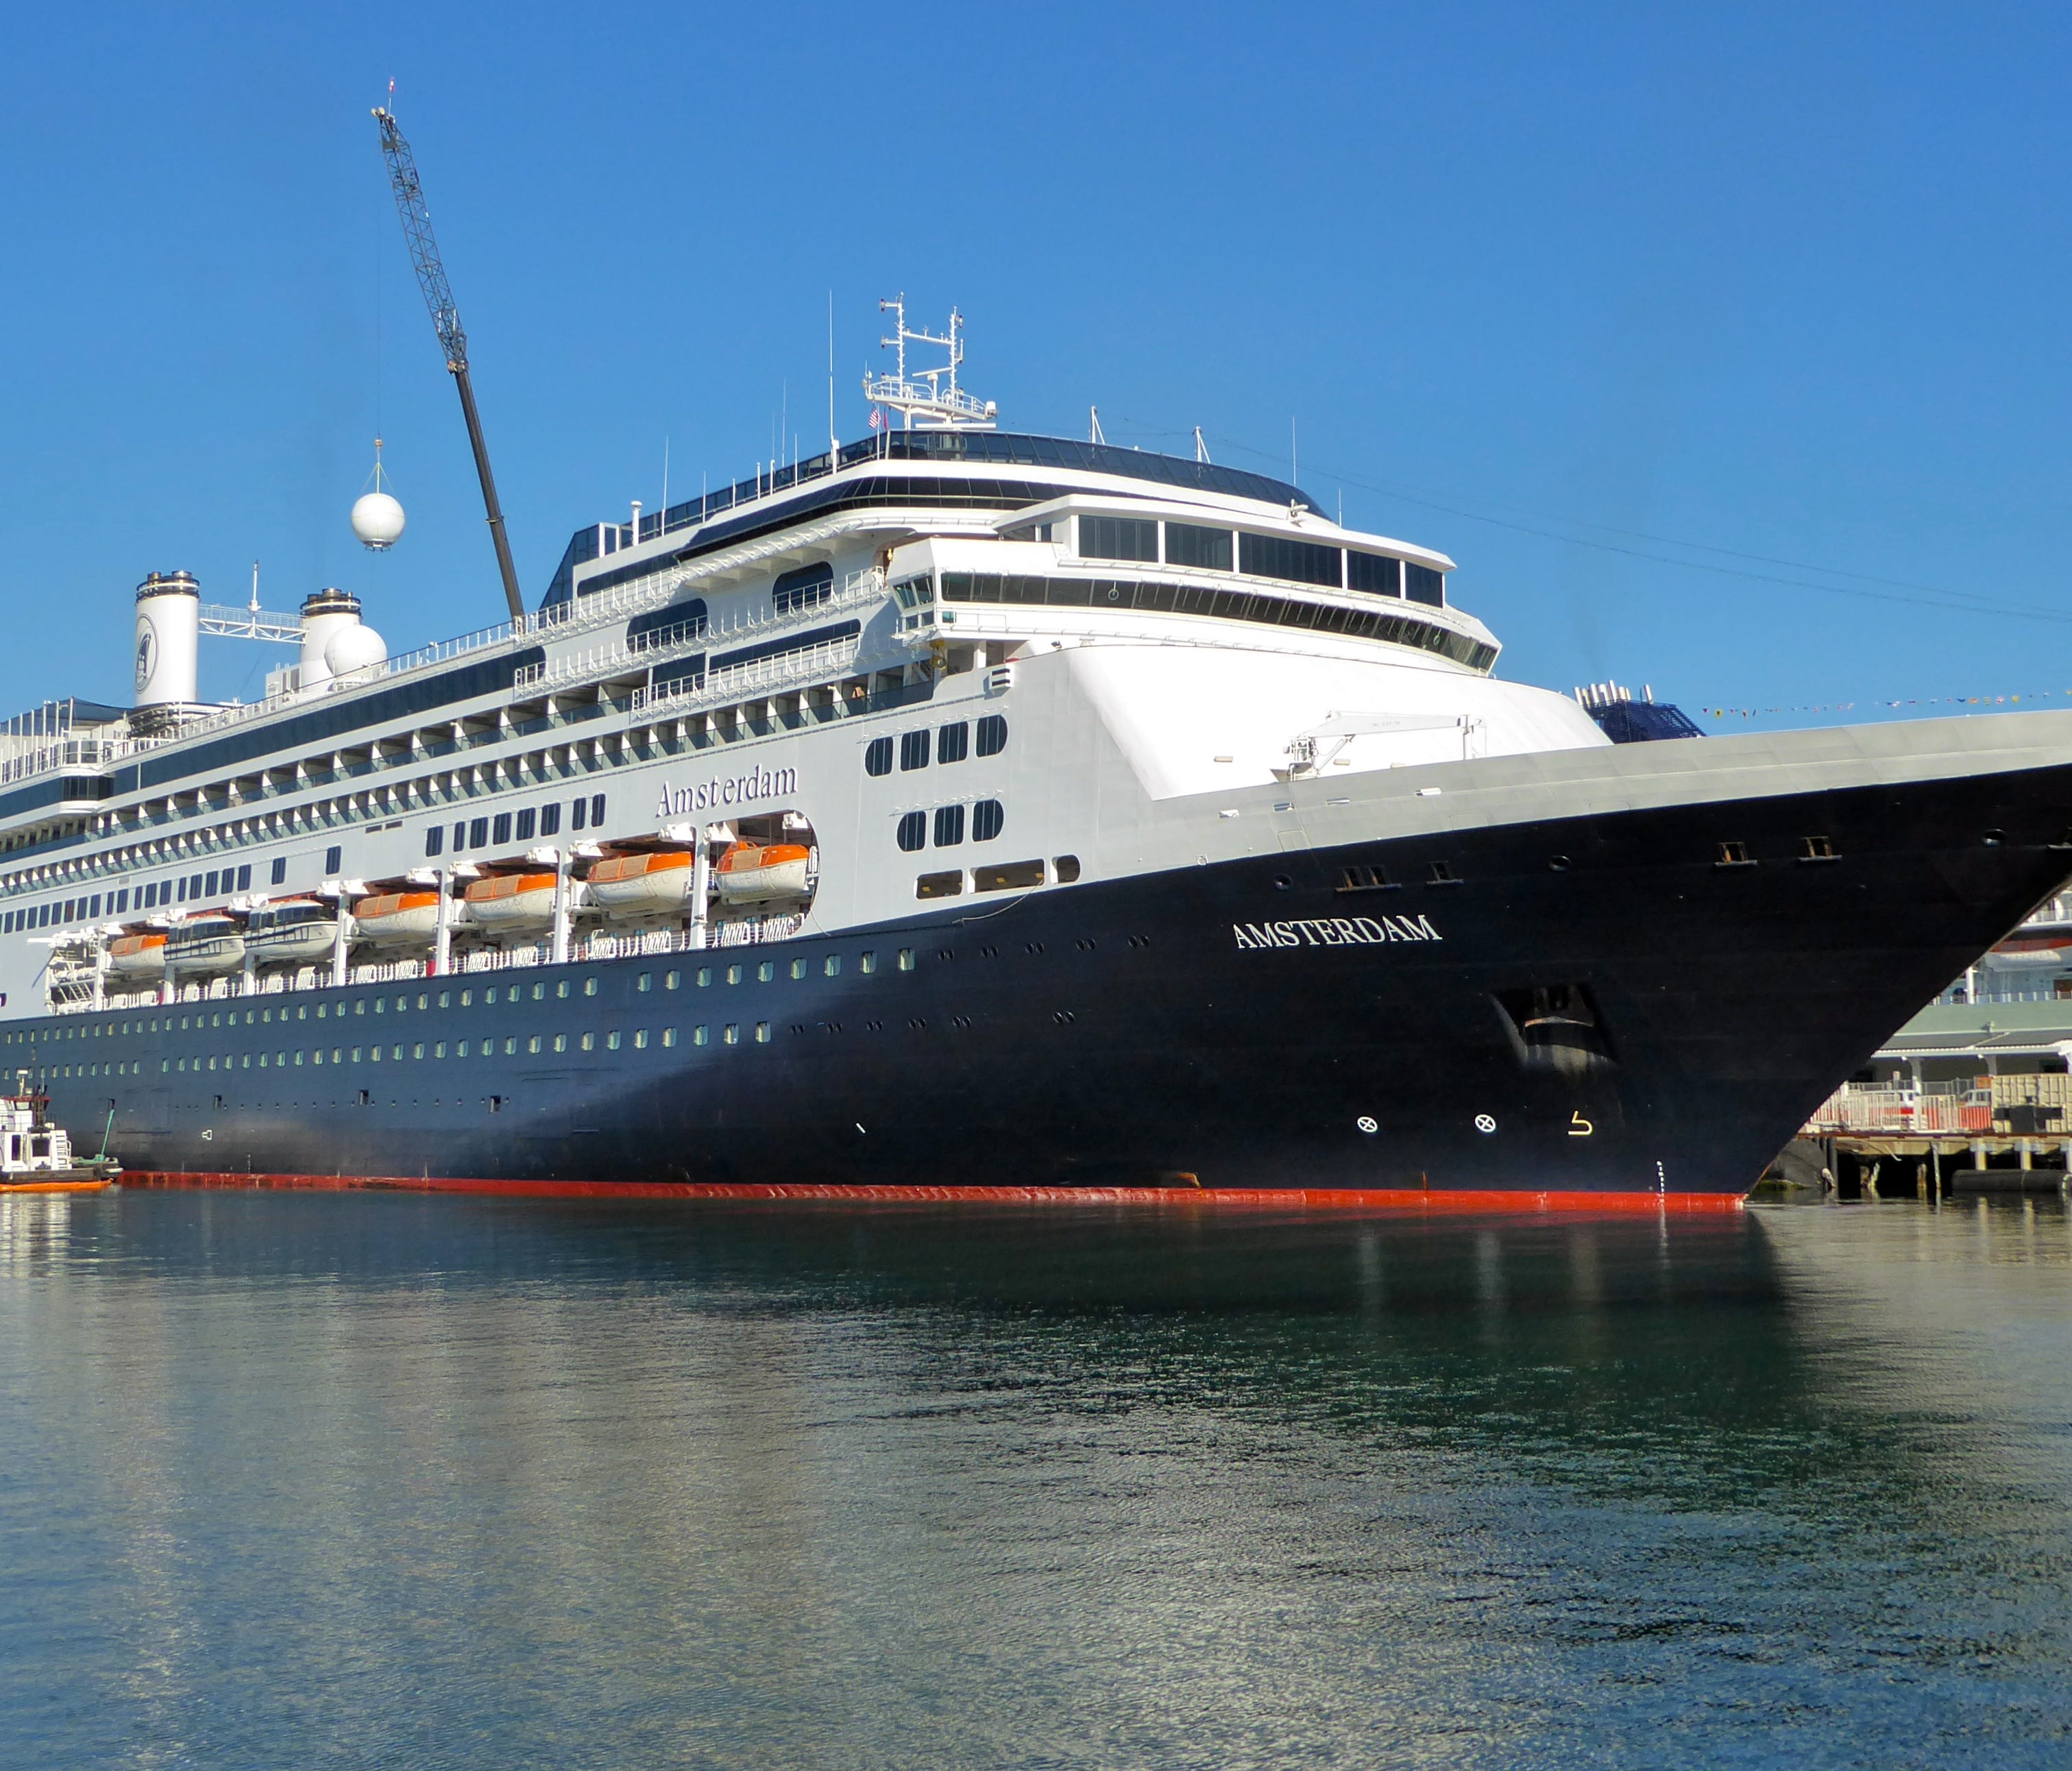 The 1,380-passenger Amsterdam, along with its near-twin the Rotterdam of 1997, shares co-flagship status in the14-vessel Holland America Line fleet.